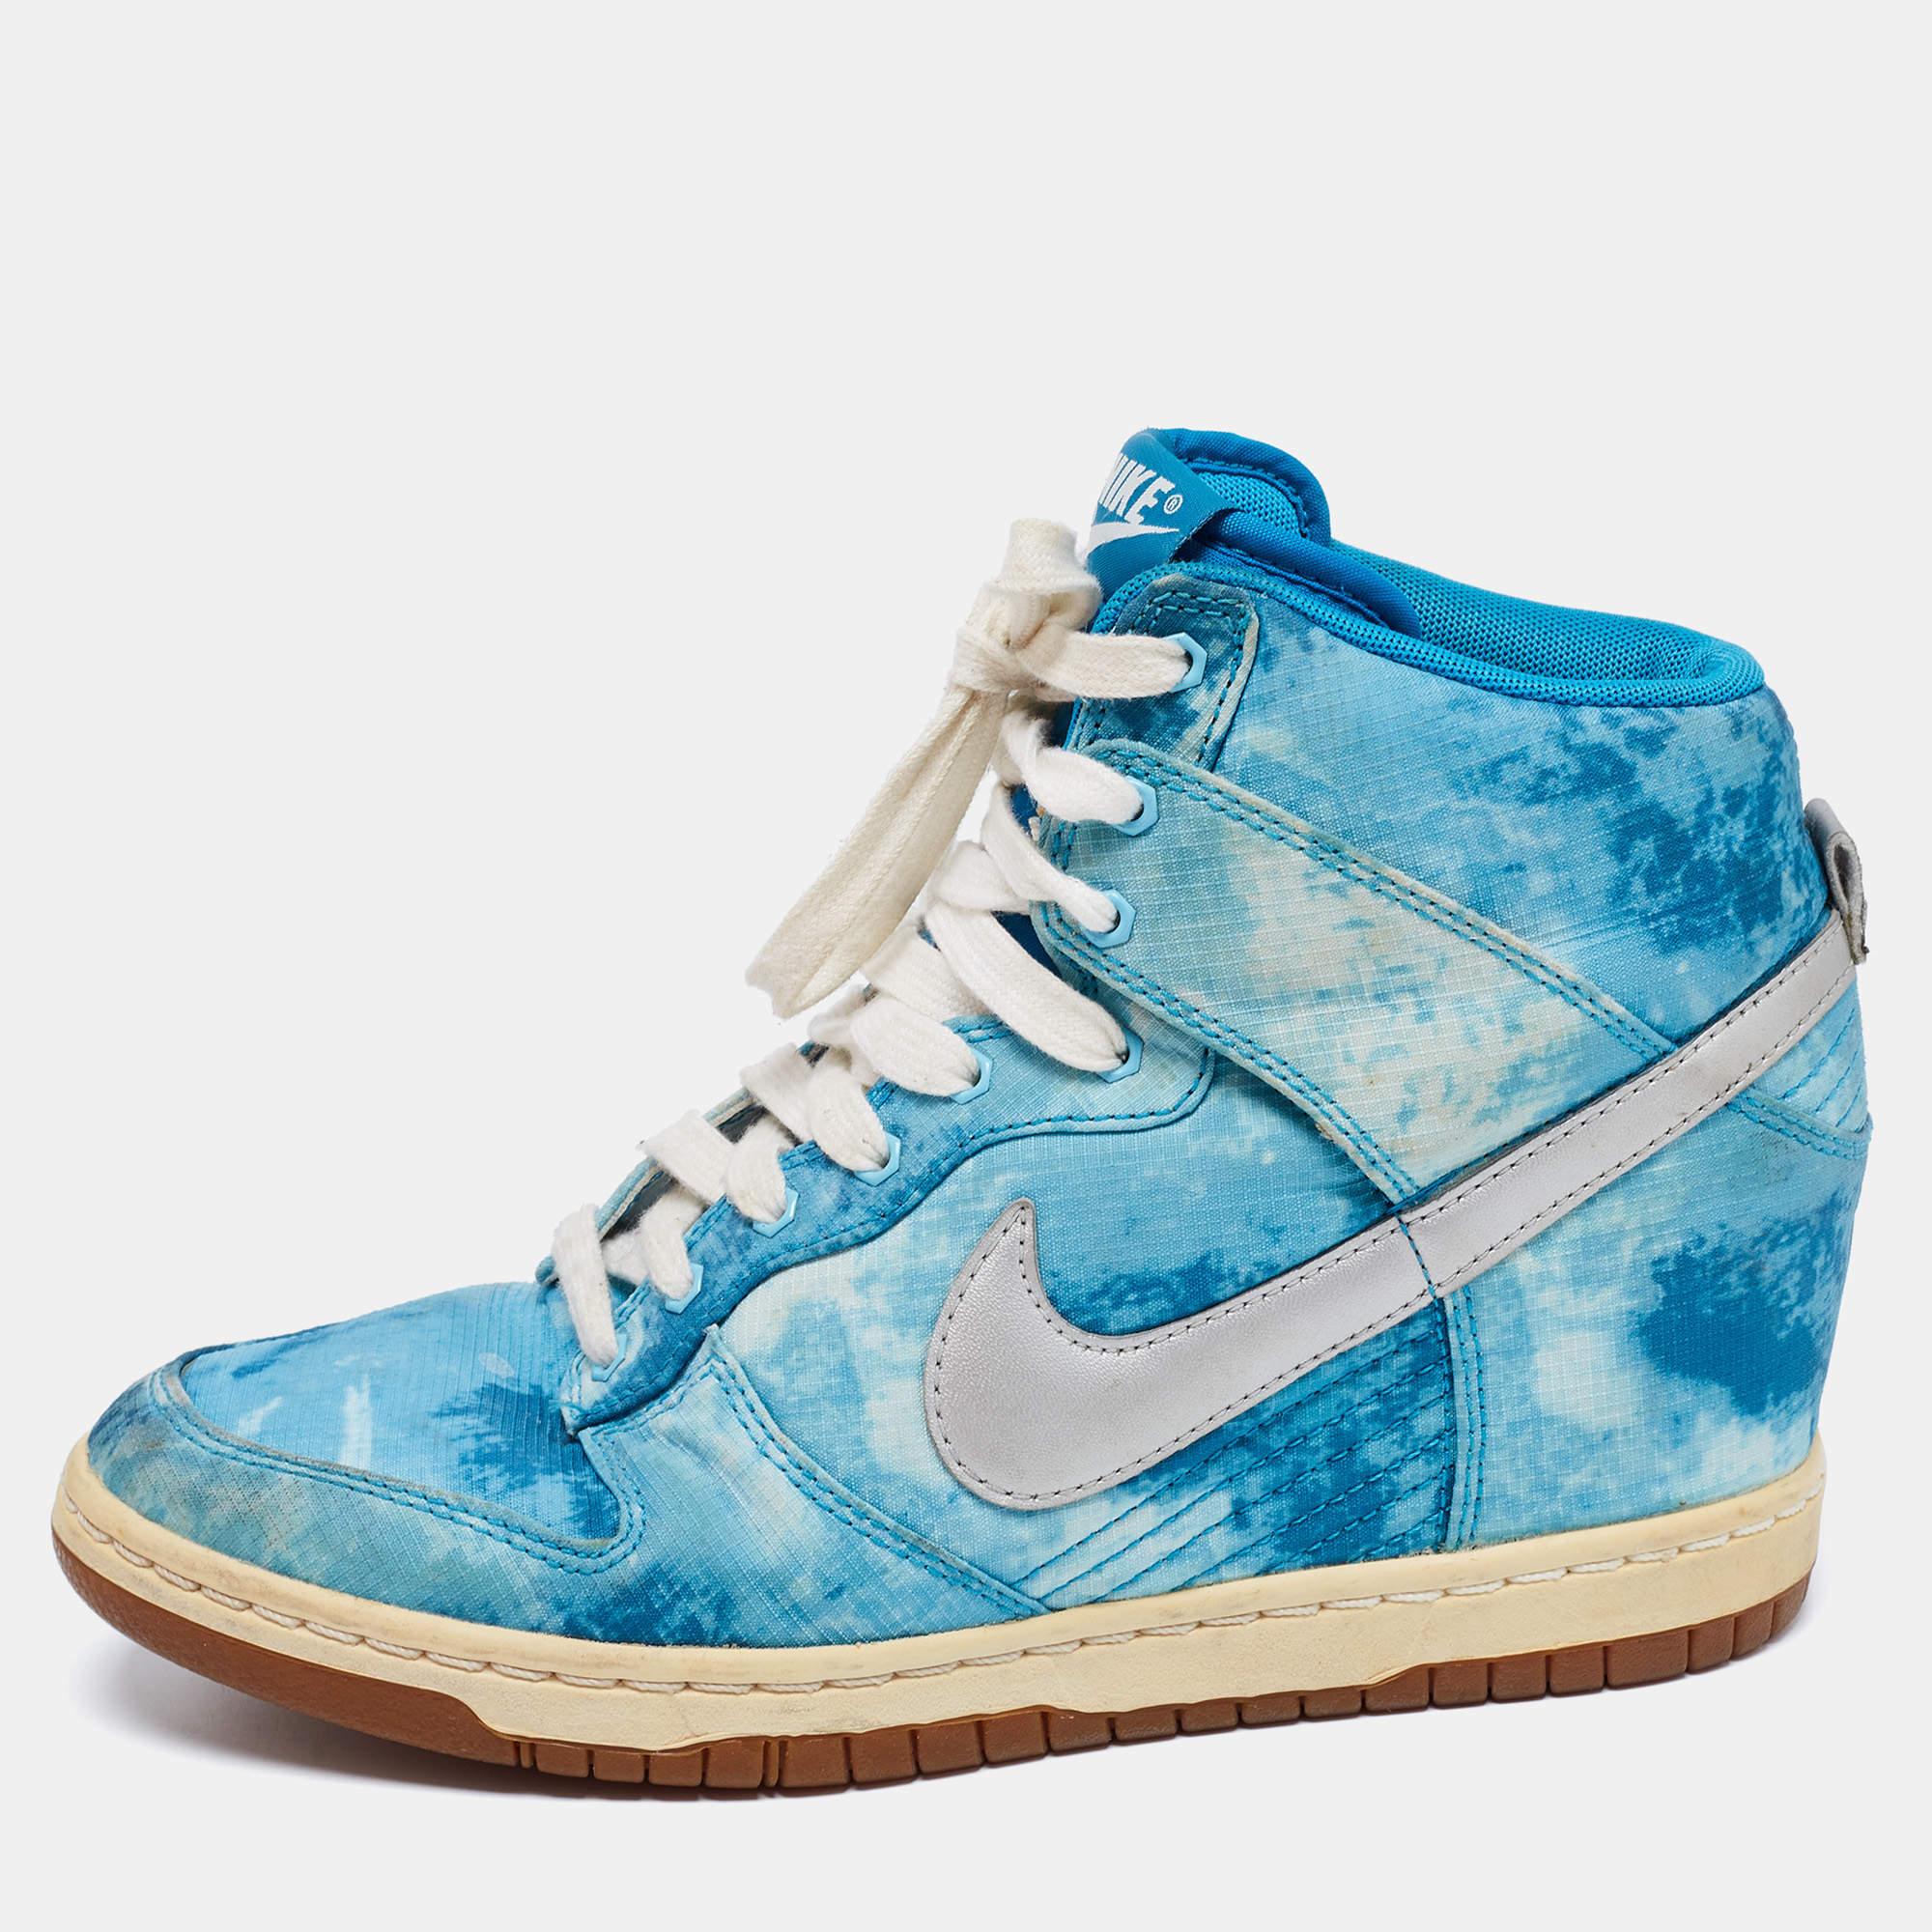 These Nike SB Dunk high top sneakers for women have a watercolor canvas exterior with the Swoosh in leather. The shoes are secured with laces, and the soles are fitted with concealed wedge heels.

Includes: Original Box